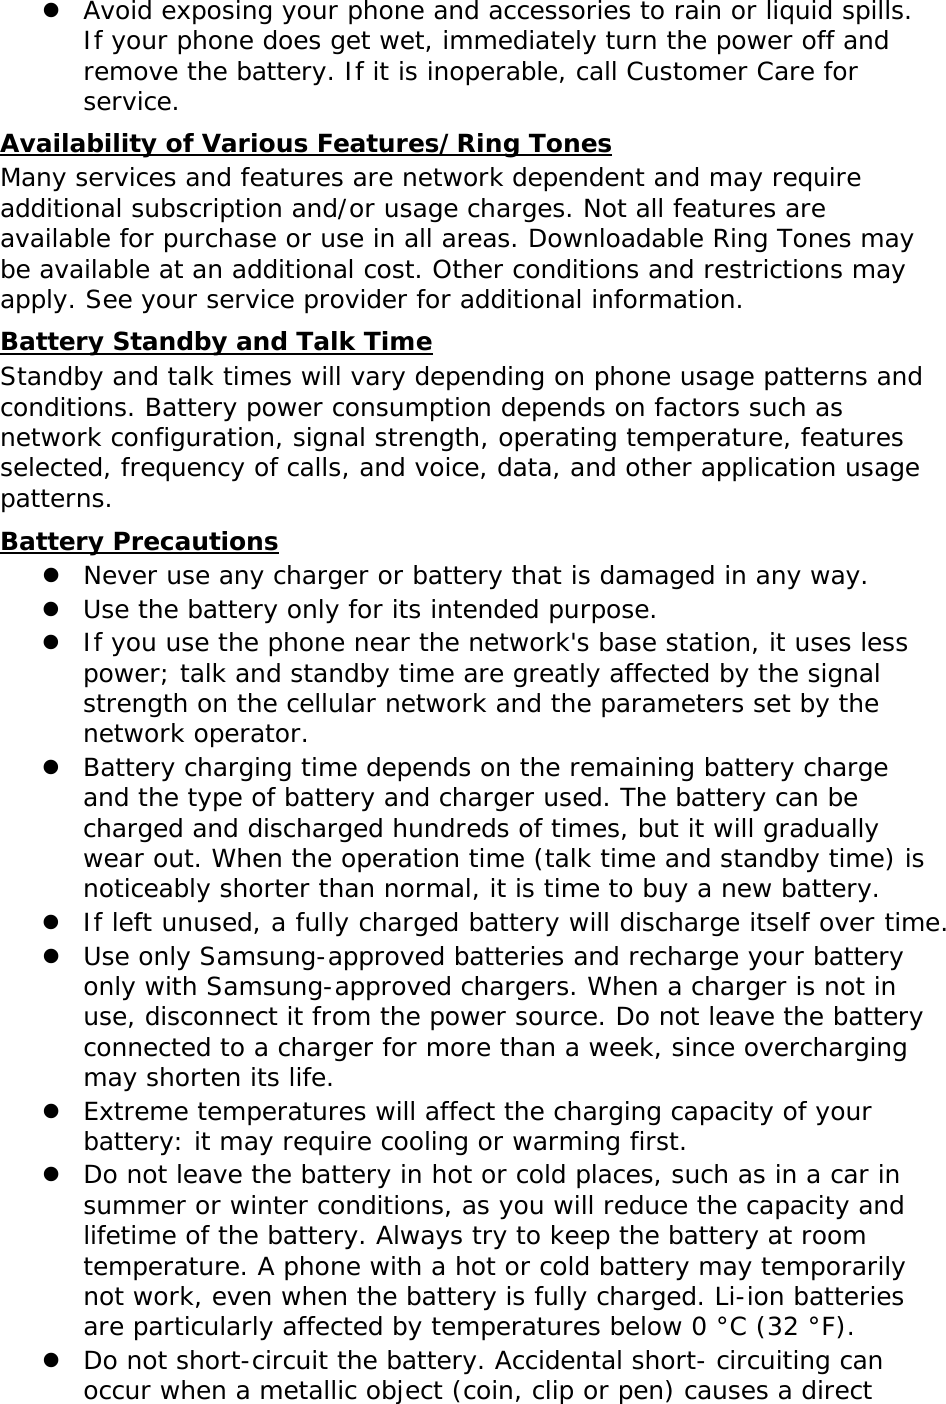  Avoid exposing your phone and accessories to rain or liquid spills. If your phone does get wet, immediately turn the power off and remove the battery. If it is inoperable, call Customer Care for service. Availability of Various Features/Ring Tones Many services and features are network dependent and may require additional subscription and/or usage charges. Not all features are available for purchase or use in all areas. Downloadable Ring Tones may be available at an additional cost. Other conditions and restrictions may apply. See your service provider for additional information. Battery Standby and Talk Time Standby and talk times will vary depending on phone usage patterns and conditions. Battery power consumption depends on factors such as network configuration, signal strength, operating temperature, features selected, frequency of calls, and voice, data, and other application usage patterns.  Battery Precautions  Never use any charger or battery that is damaged in any way.  Use the battery only for its intended purpose.  If you use the phone near the network&apos;s base station, it uses less power; talk and standby time are greatly affected by the signal strength on the cellular network and the parameters set by the network operator.  Battery charging time depends on the remaining battery charge and the type of battery and charger used. The battery can be charged and discharged hundreds of times, but it will gradually wear out. When the operation time (talk time and standby time) is noticeably shorter than normal, it is time to buy a new battery.  If left unused, a fully charged battery will discharge itself over time.  Use only Samsung-approved batteries and recharge your battery only with Samsung-approved chargers. When a charger is not in use, disconnect it from the power source. Do not leave the battery connected to a charger for more than a week, since overcharging may shorten its life.  Extreme temperatures will affect the charging capacity of your battery: it may require cooling or warming first.  Do not leave the battery in hot or cold places, such as in a car in summer or winter conditions, as you will reduce the capacity and lifetime of the battery. Always try to keep the battery at room temperature. A phone with a hot or cold battery may temporarily not work, even when the battery is fully charged. Li-ion batteries are particularly affected by temperatures below 0 °C (32 °F).  Do not short-circuit the battery. Accidental short- circuiting can occur when a metallic object (coin, clip or pen) causes a direct 